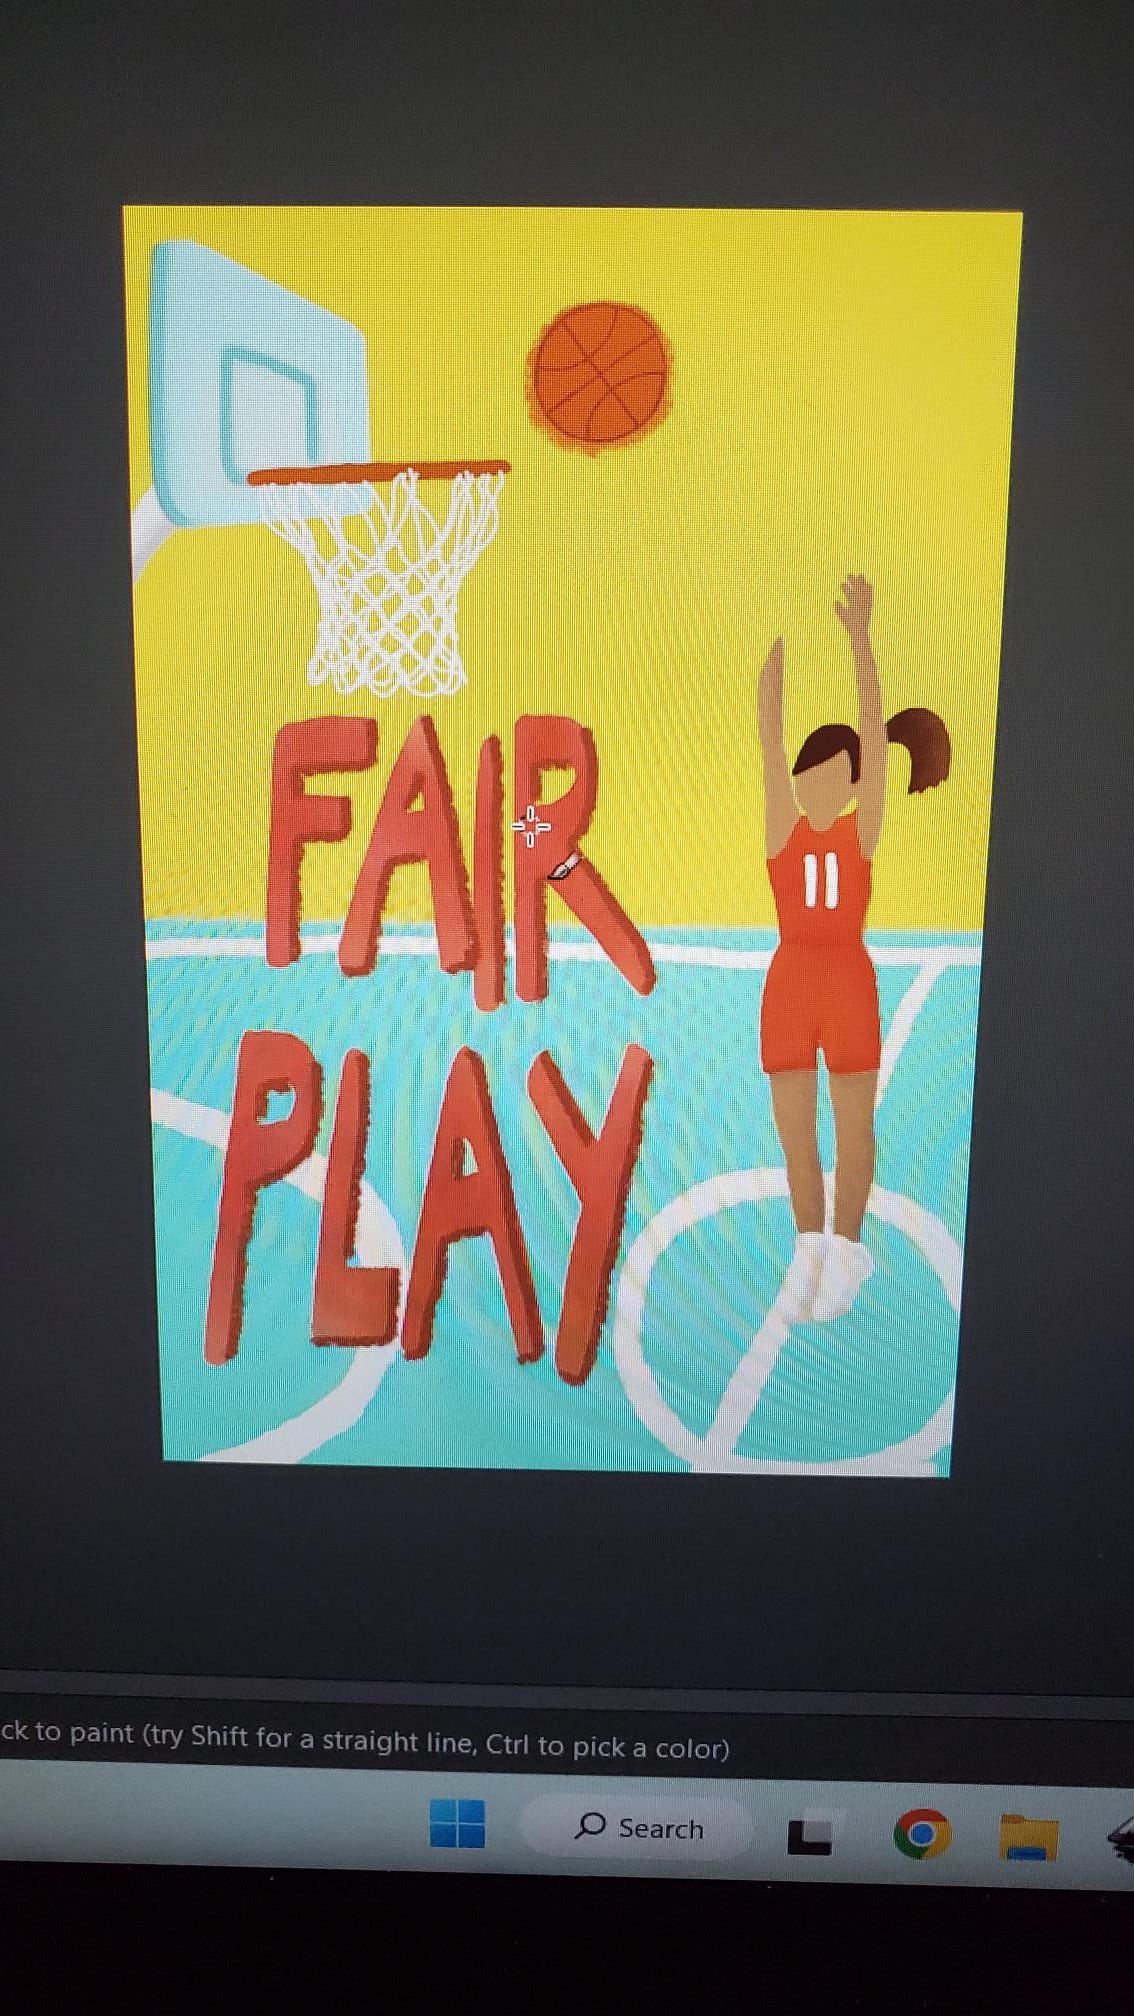 Color image of the book cover, a girl shooting with the ball in mid-air, but she has no face.